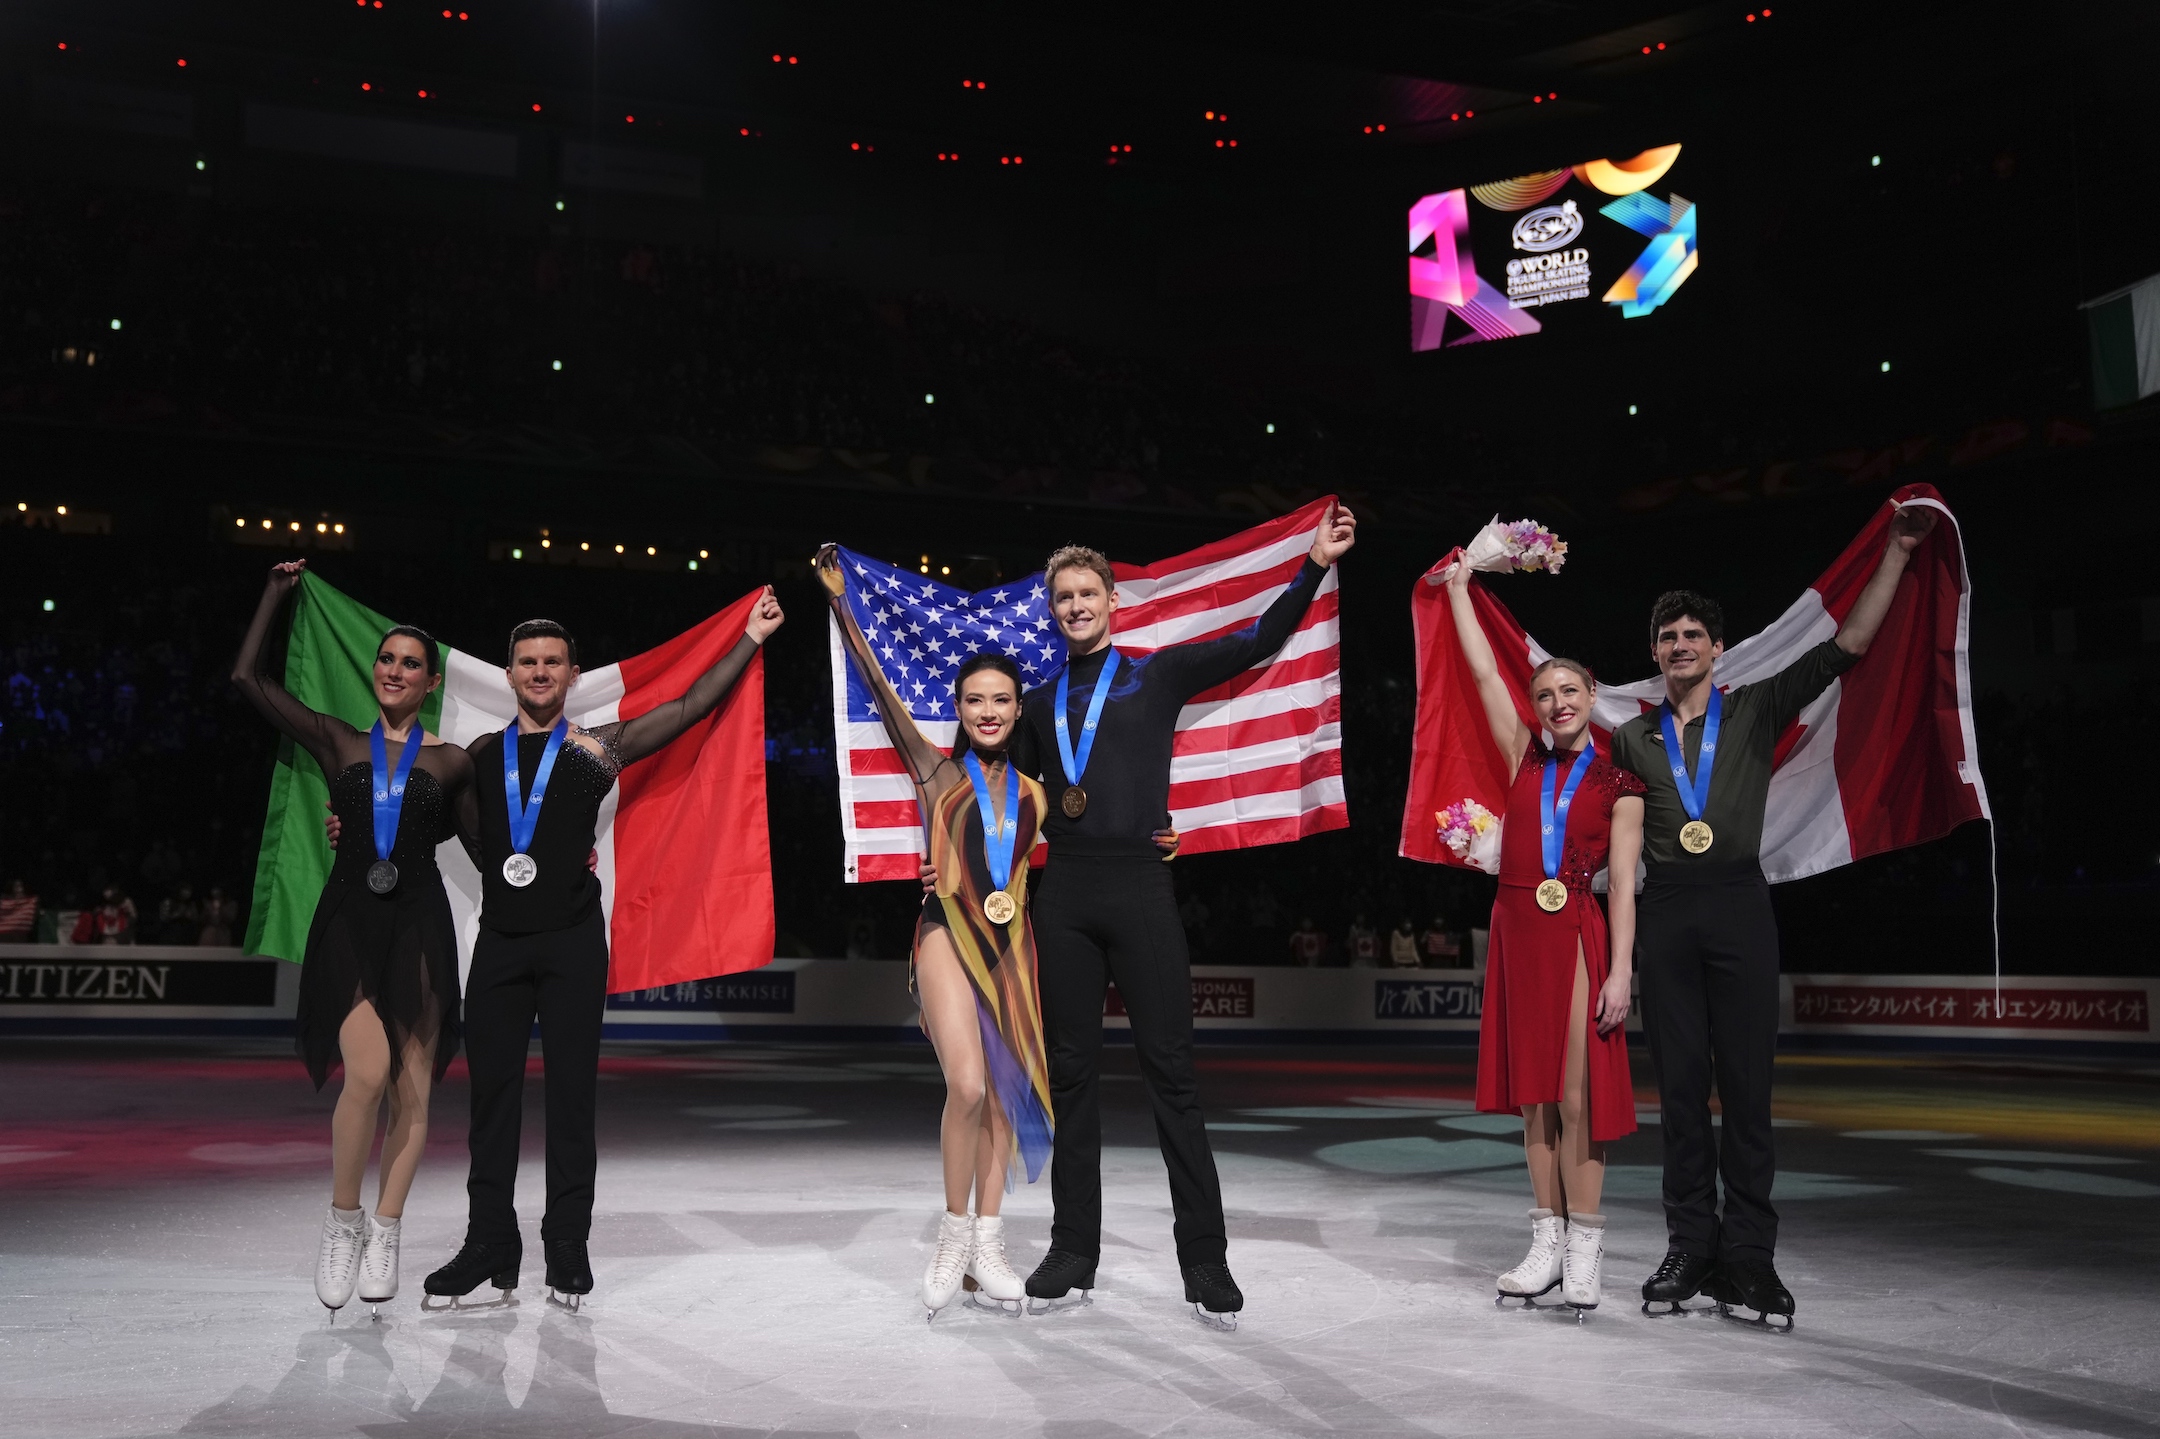 Madison Chock and Evan Bates of the U.S., center, with gold medals, Charlene Guignard and Marco Fabbri of Italy, left, with silver medals, and Piper Gilles and Paul Poirier of Canada, with bronze medals, pose for a photo at the end of the award ceremony for the ice dance free dance in the World Figure Skating Championships in Saitama, north of Tokyo, Saturday, March 25, 2023.